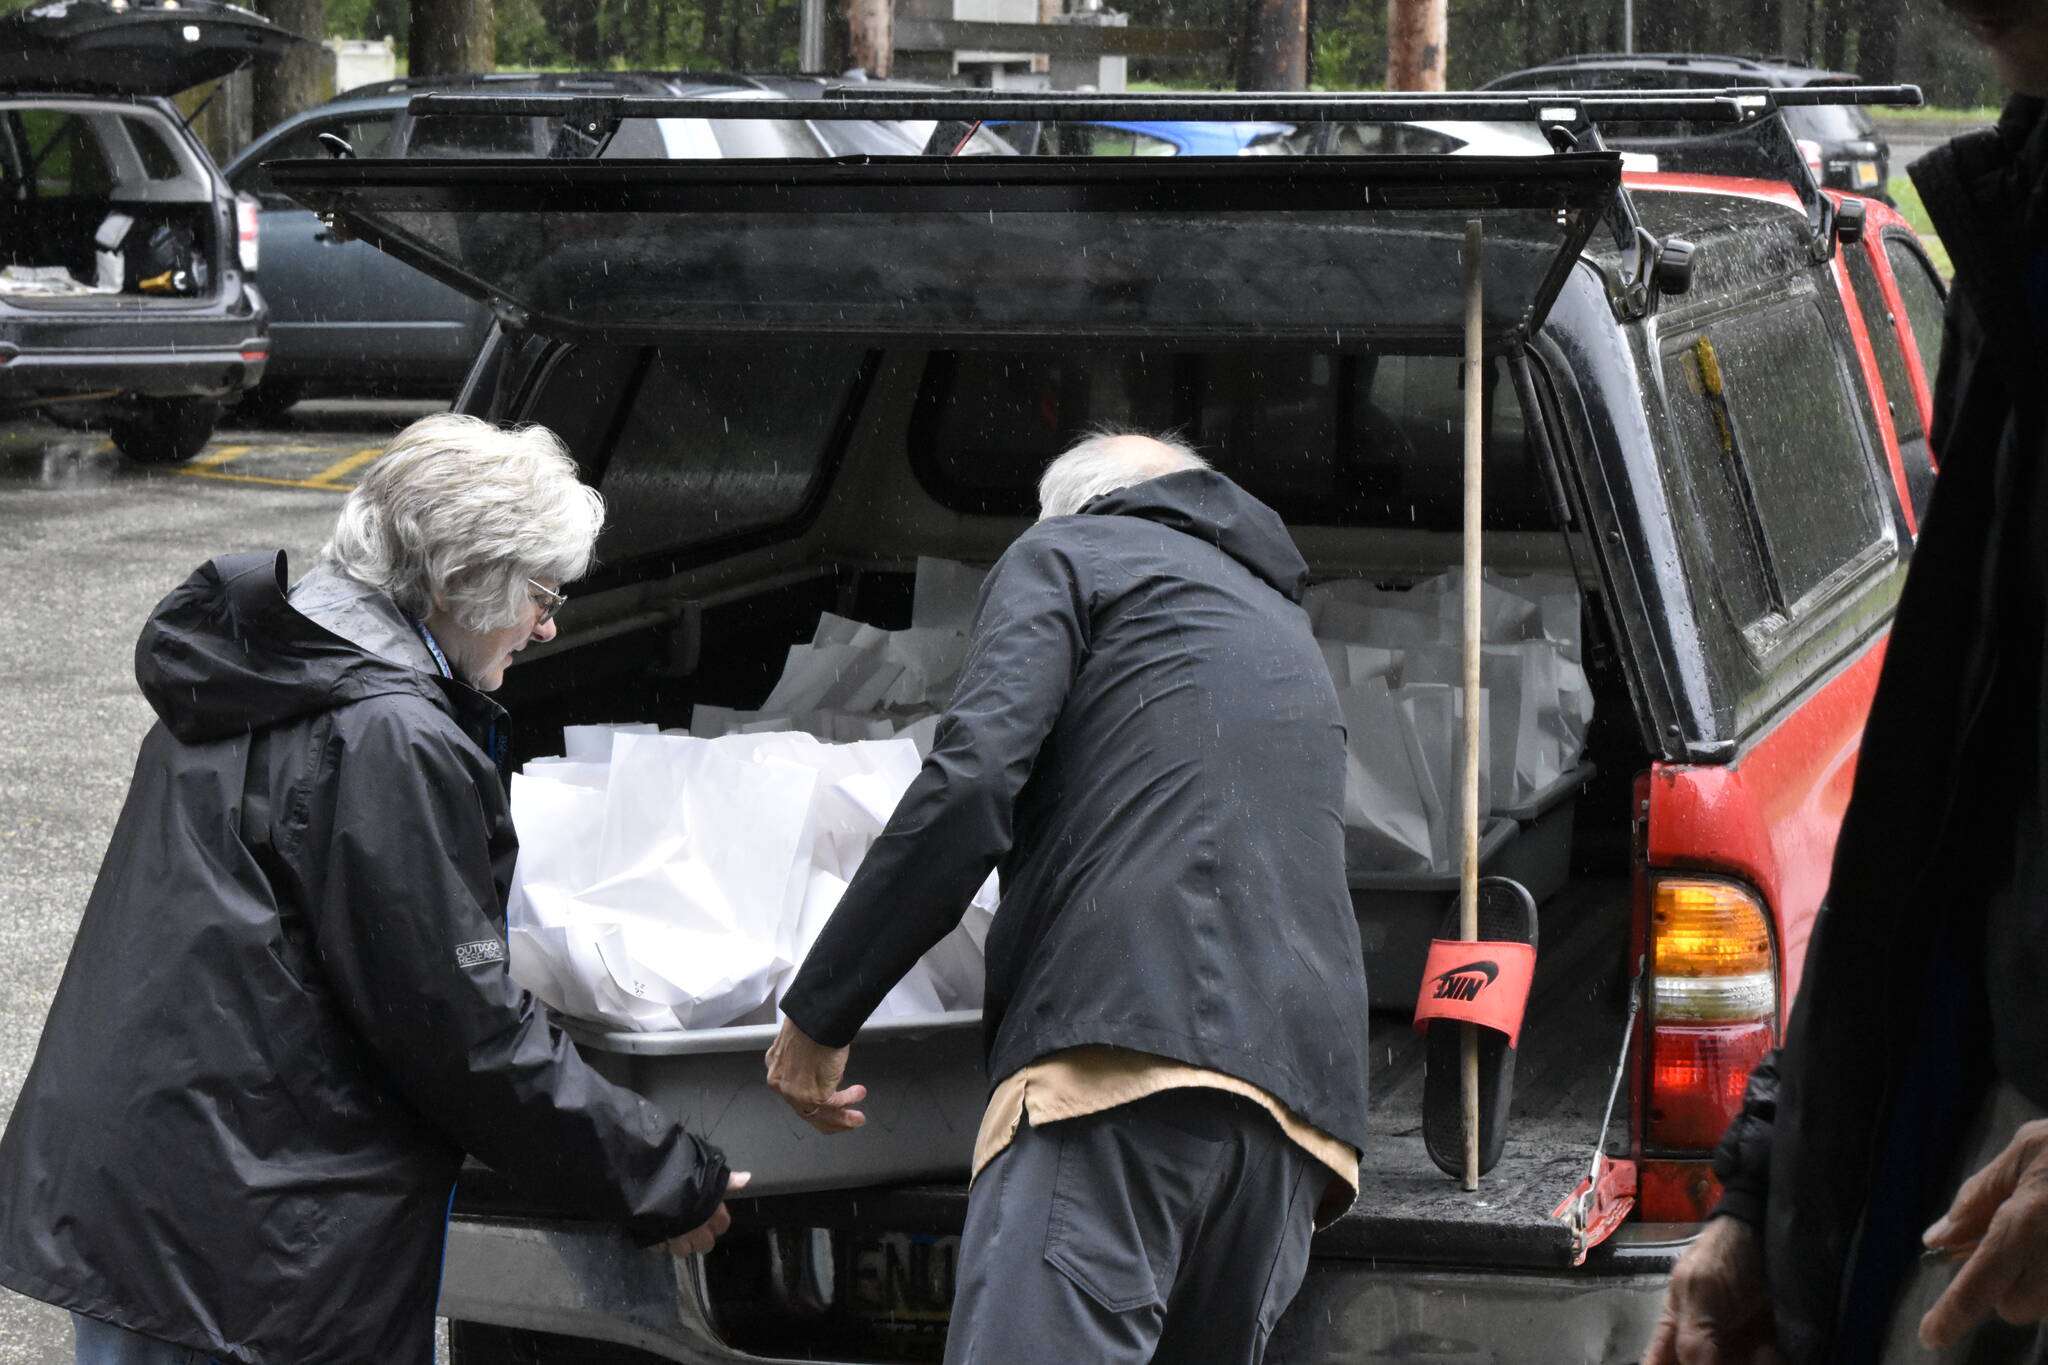 Helen Unruh and John Haywood unload prepared meals St. Paul’s Catholic Church for the Meals on Wheels program on Monday, May 23, 2022. (Peter Segall / Juneau Empire)